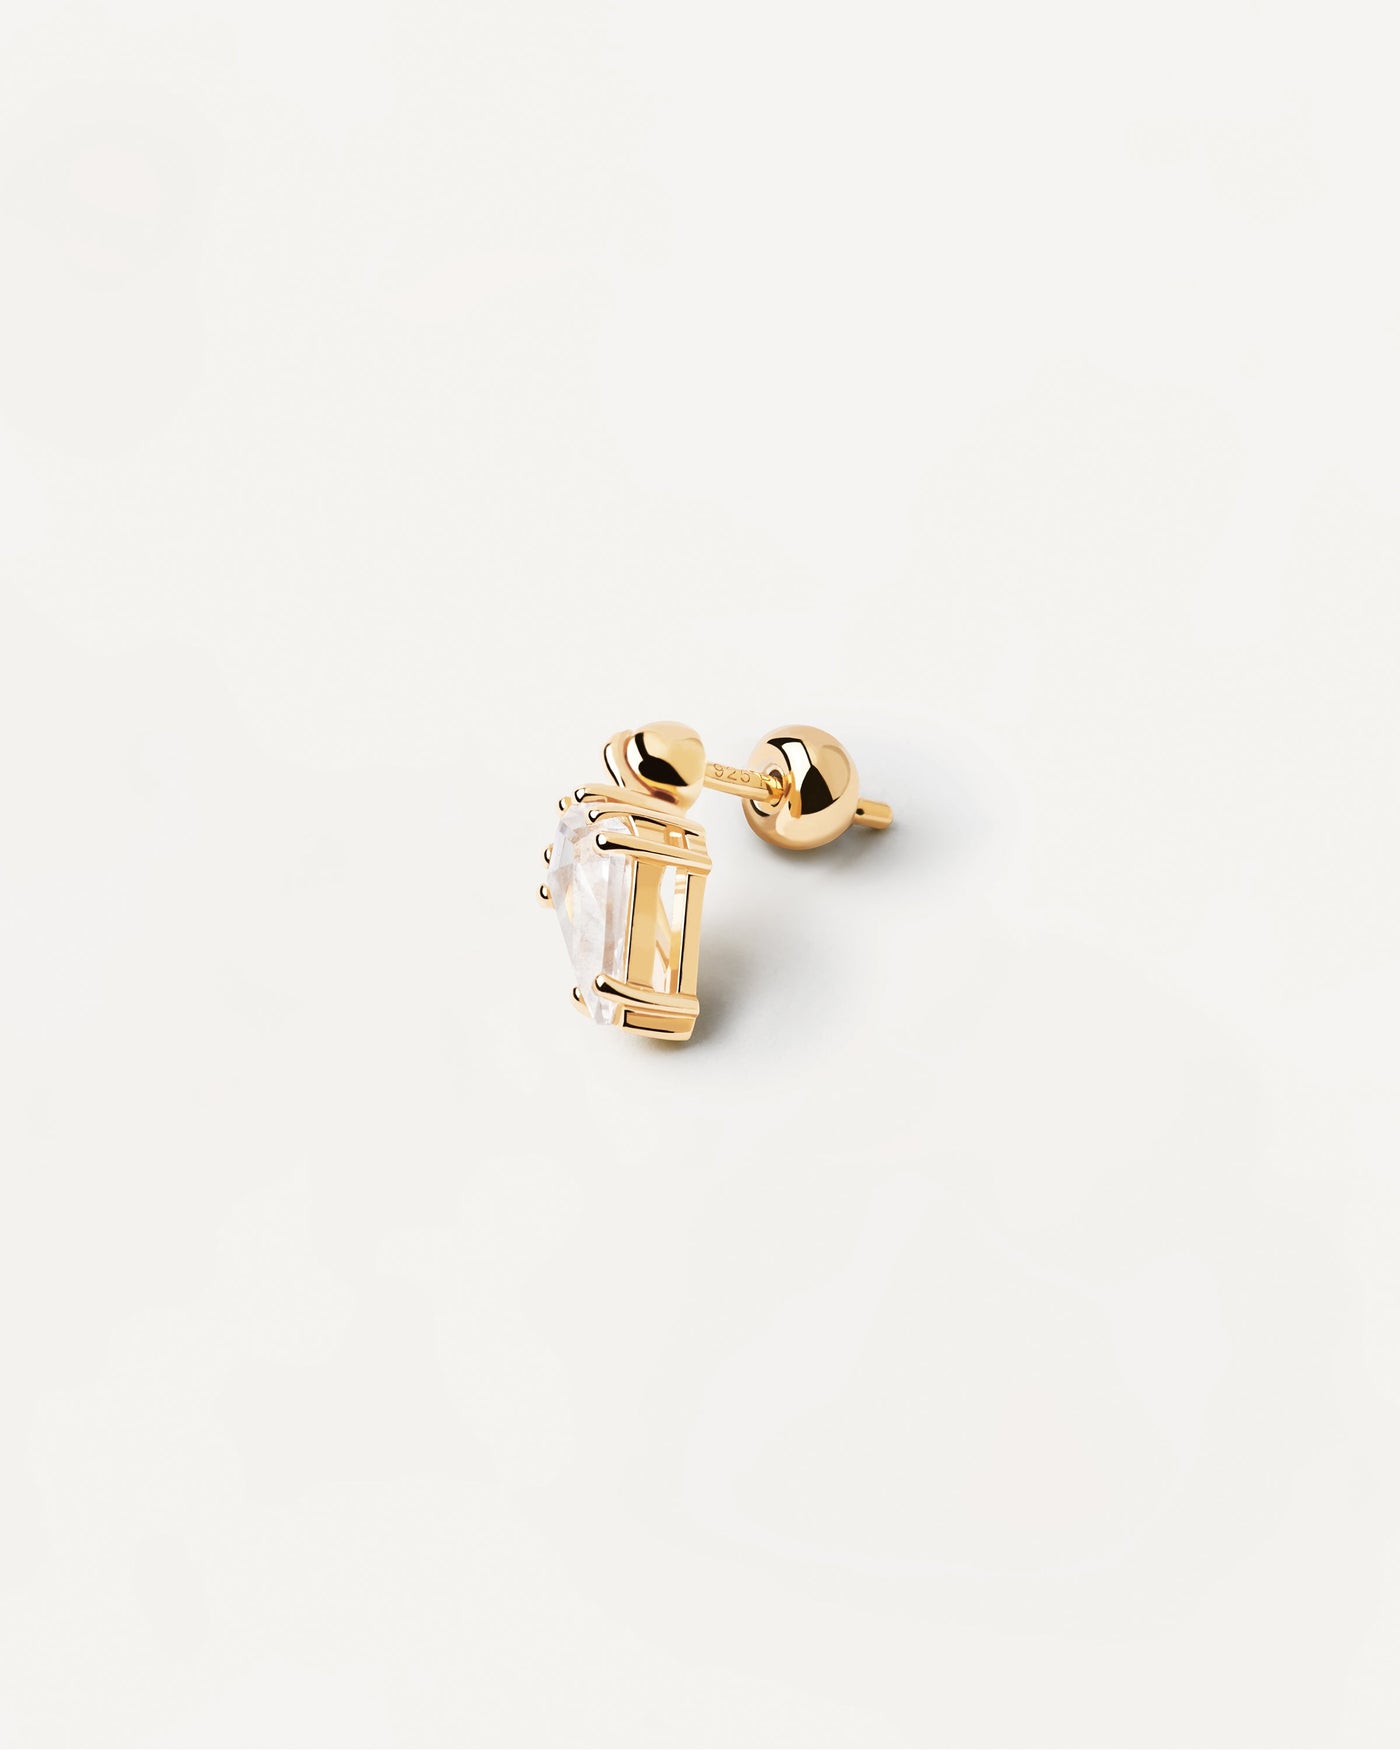 2023 Selection | Lua Single Earring. Gold-plated ear piercing with drop pendant in white zirconia. Get the latest arrival from PDPAOLA. Place your order safely and get this Best Seller. Free Shipping.